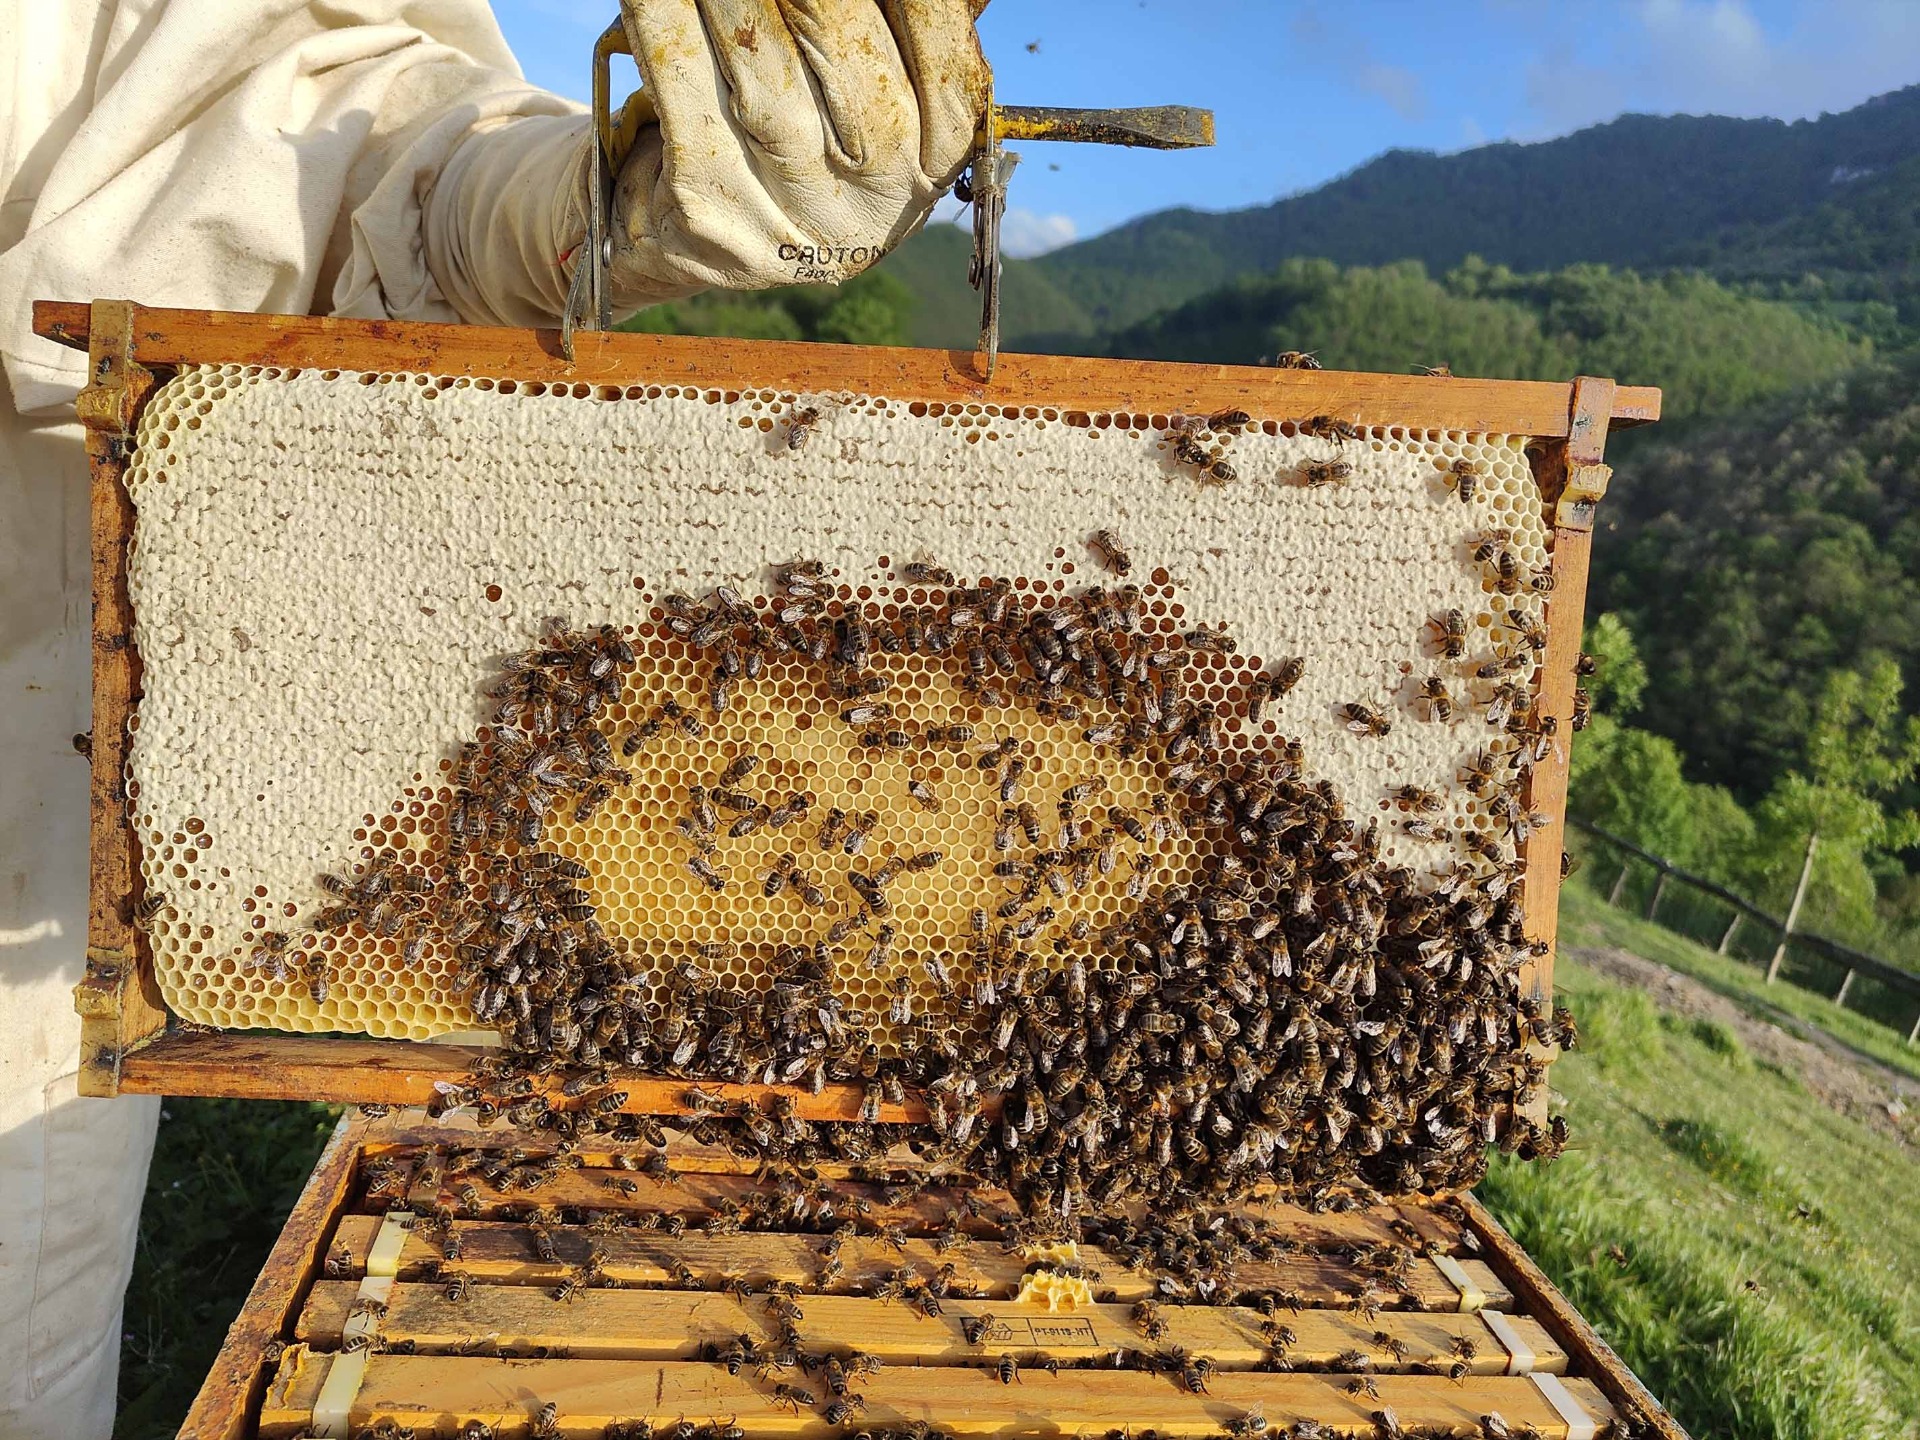  Beekeeper holding a hive with several bees